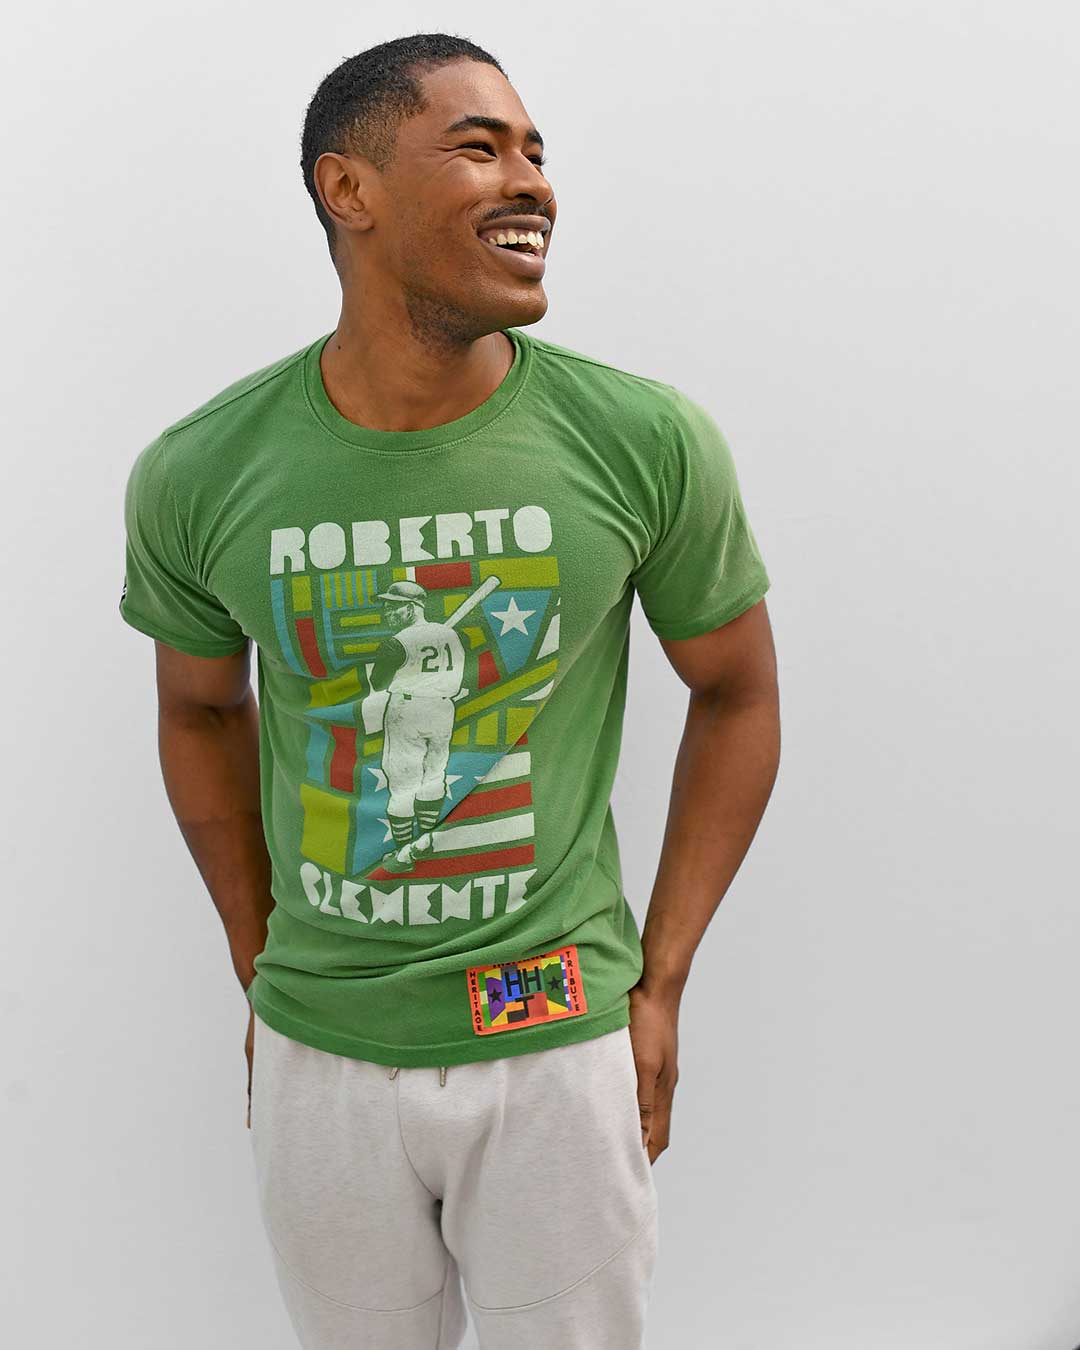 HHT - Clemente Heritage Green Tee XL / Sun Faded Green